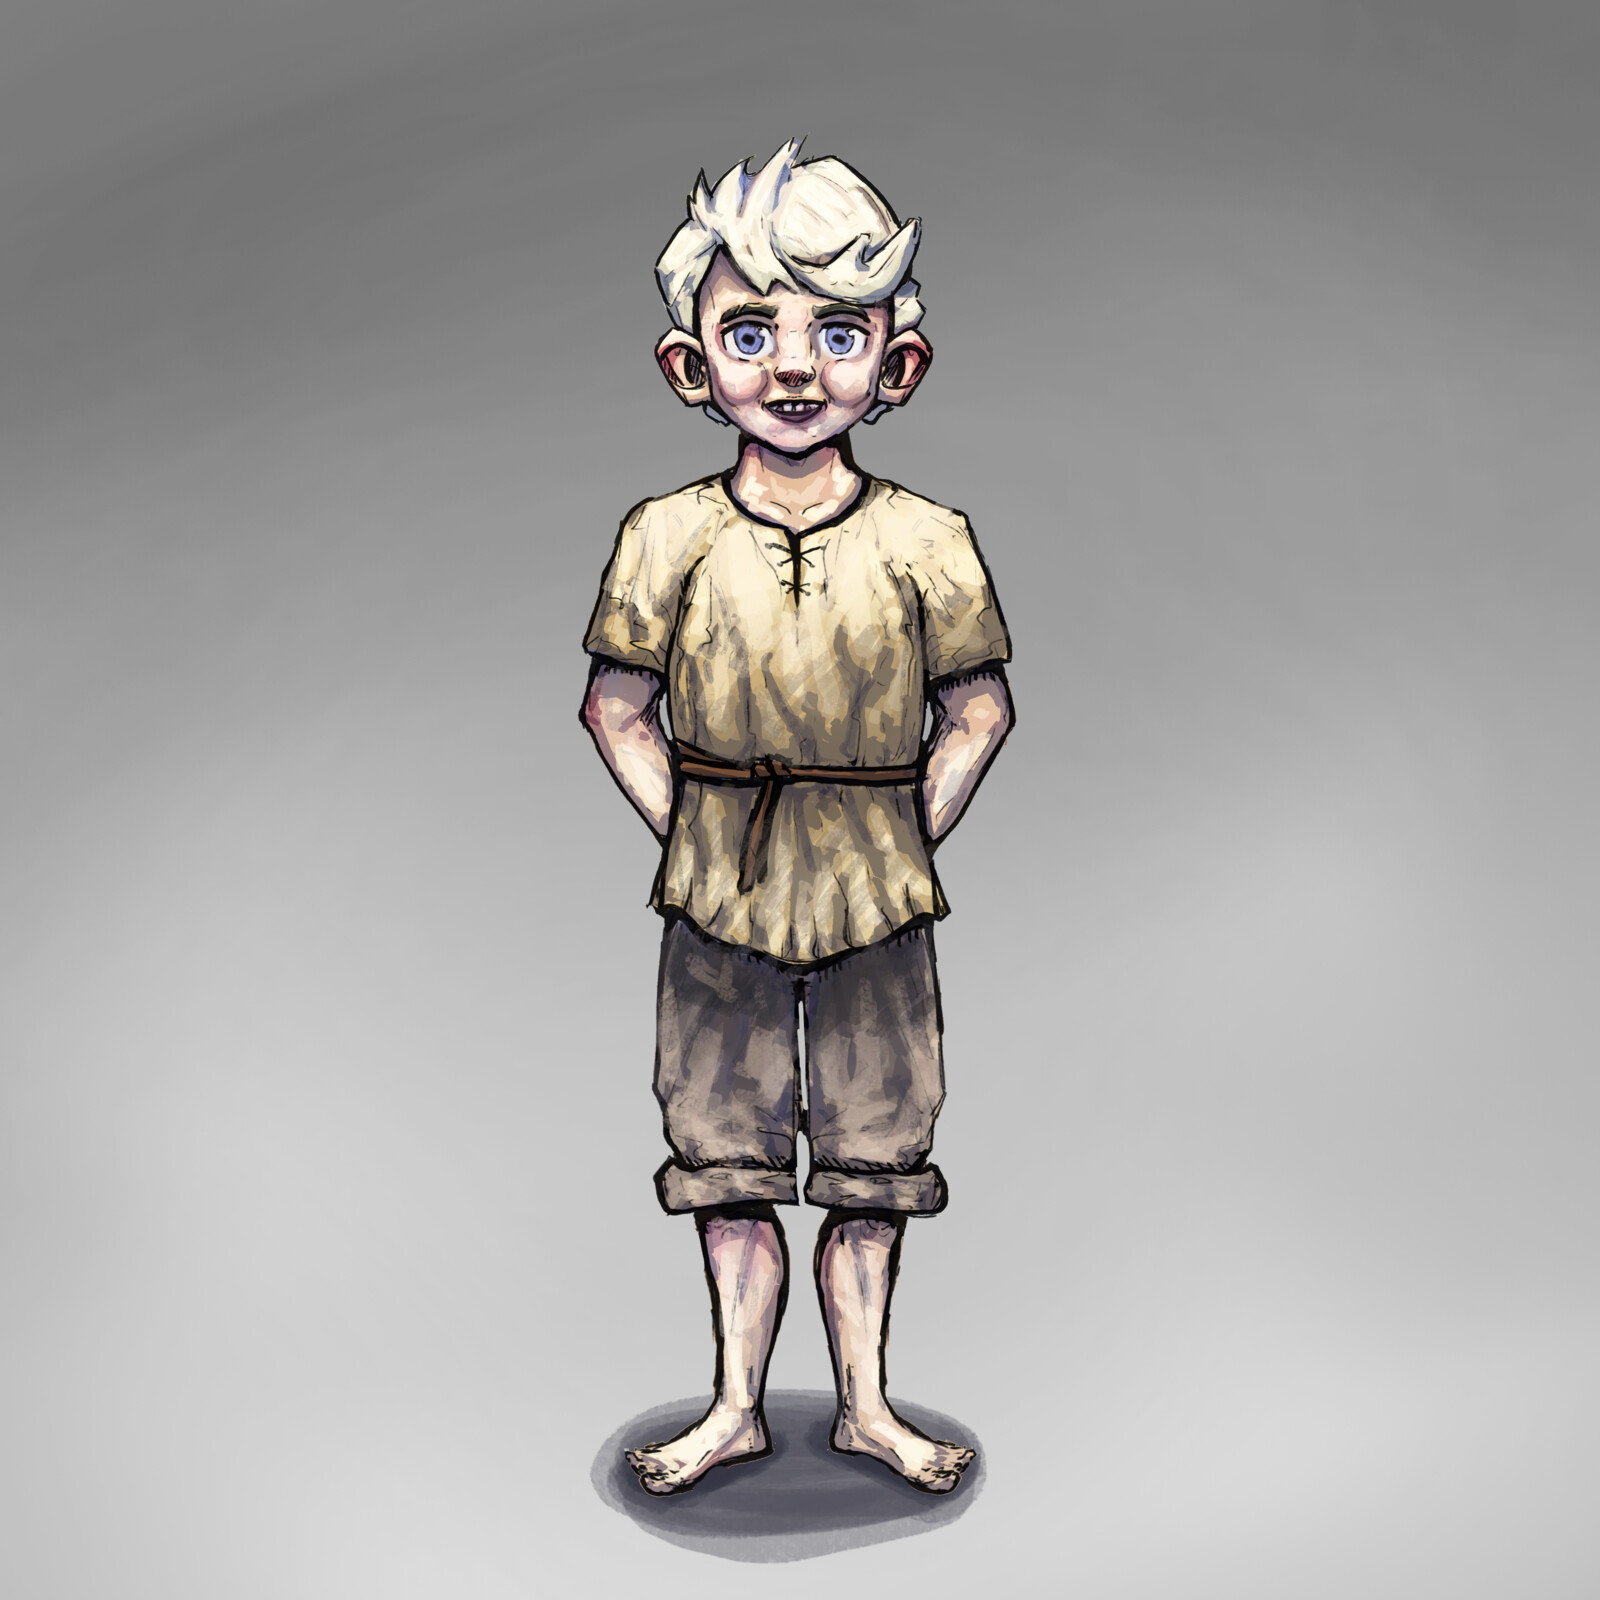 Character design for Lukas (Player Character).